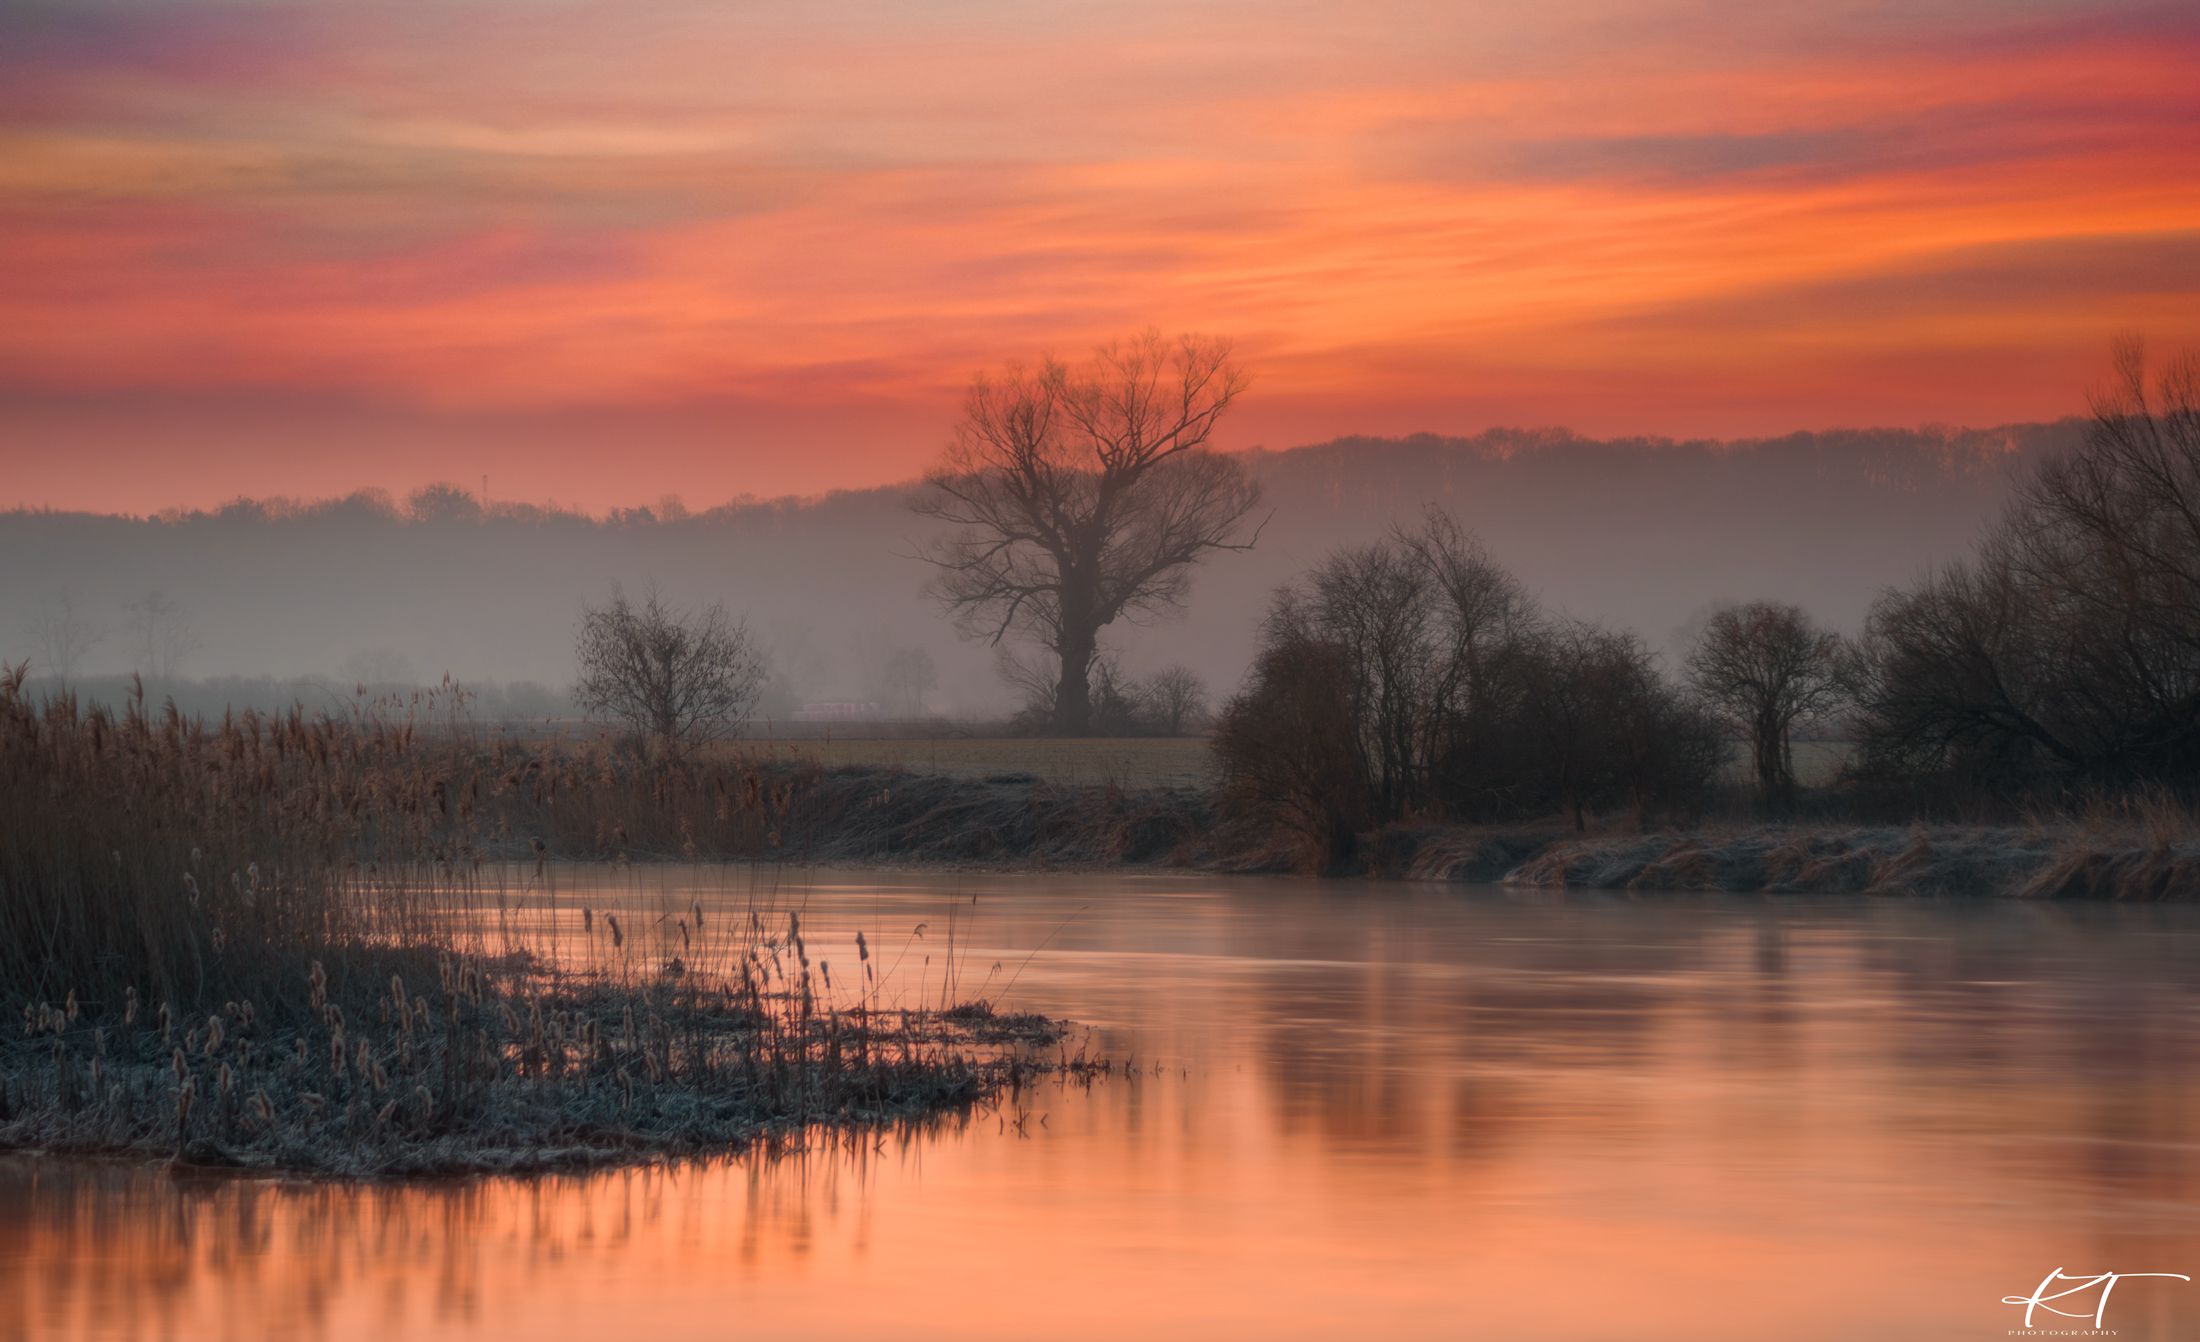 river  sunrise  winter 2022  landscape  gwda  light  dawn  forest  water  sky  clouds  march  tree  haze  reflection in the water  awakening  nature  No People  Landscape - Scenery  Beauty In Nature  Photography, Tollas Krzysztof